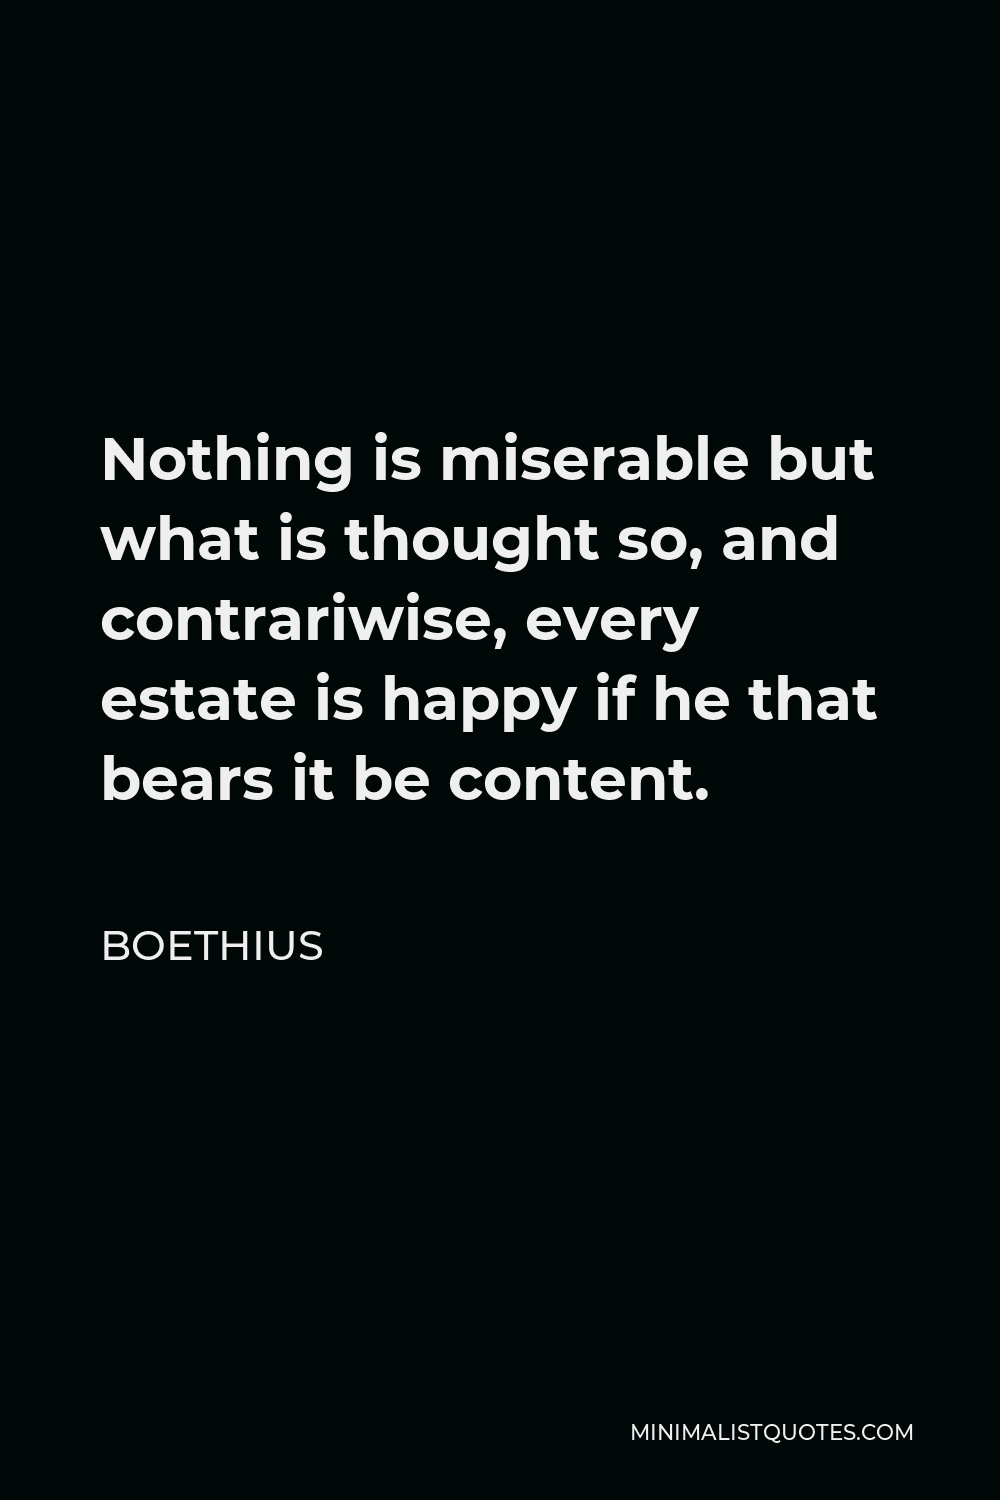 Boethius Quote - Nothing is miserable but what is thought so, and contrariwise, every estate is happy if he that bears it be content.